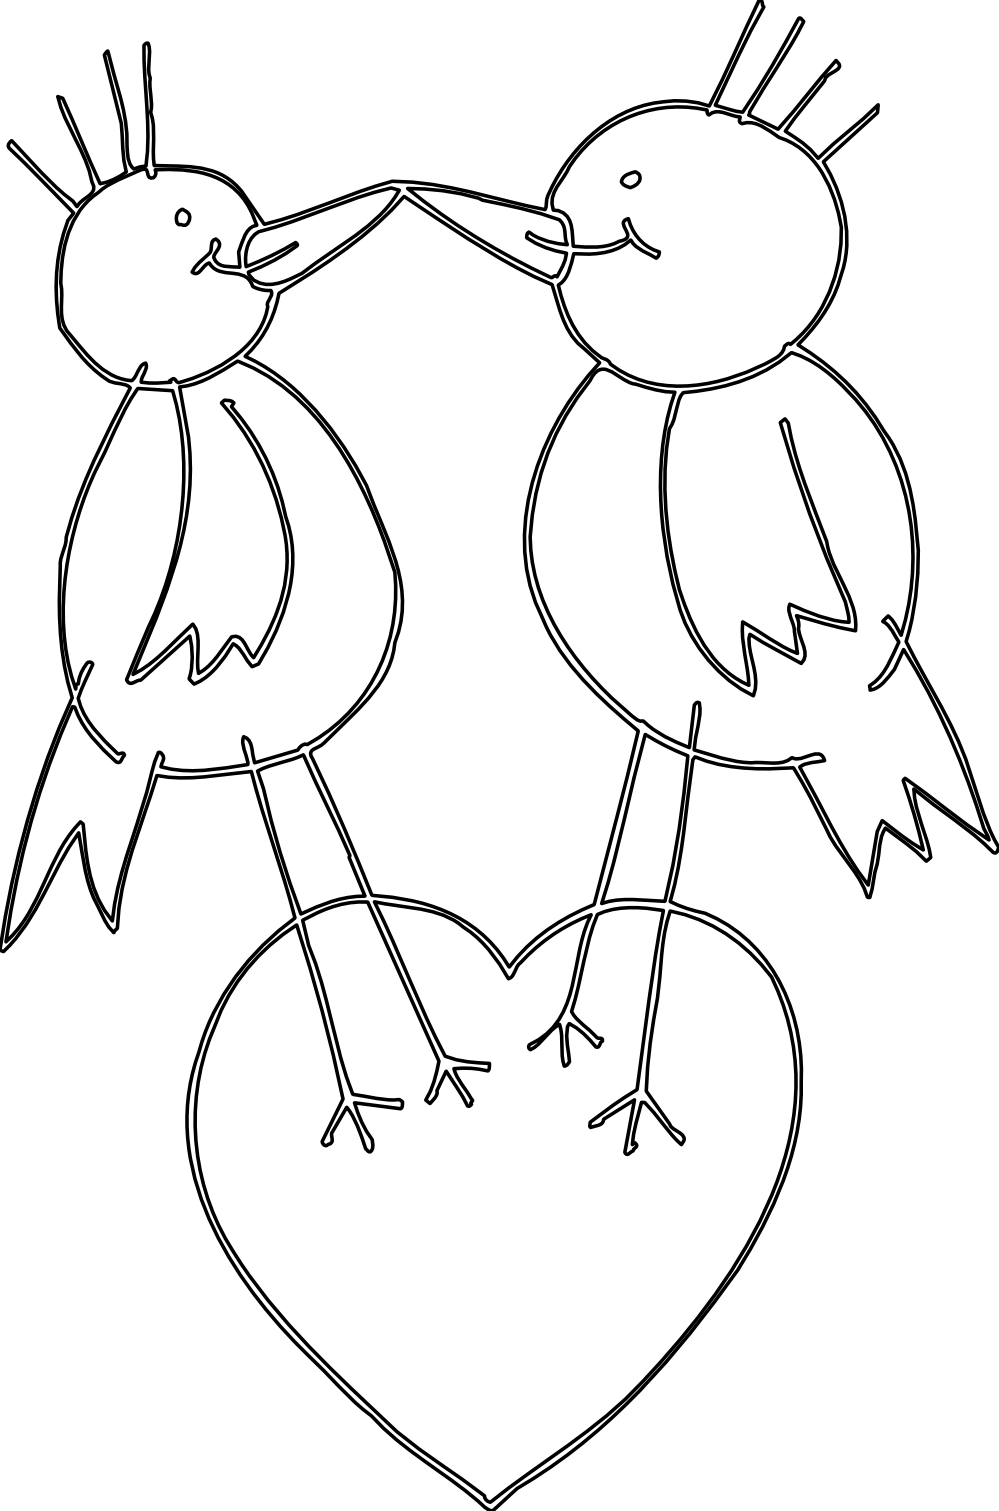 Love Birds Art Coloring Book Colouring Sheet Page intelligentsia ...